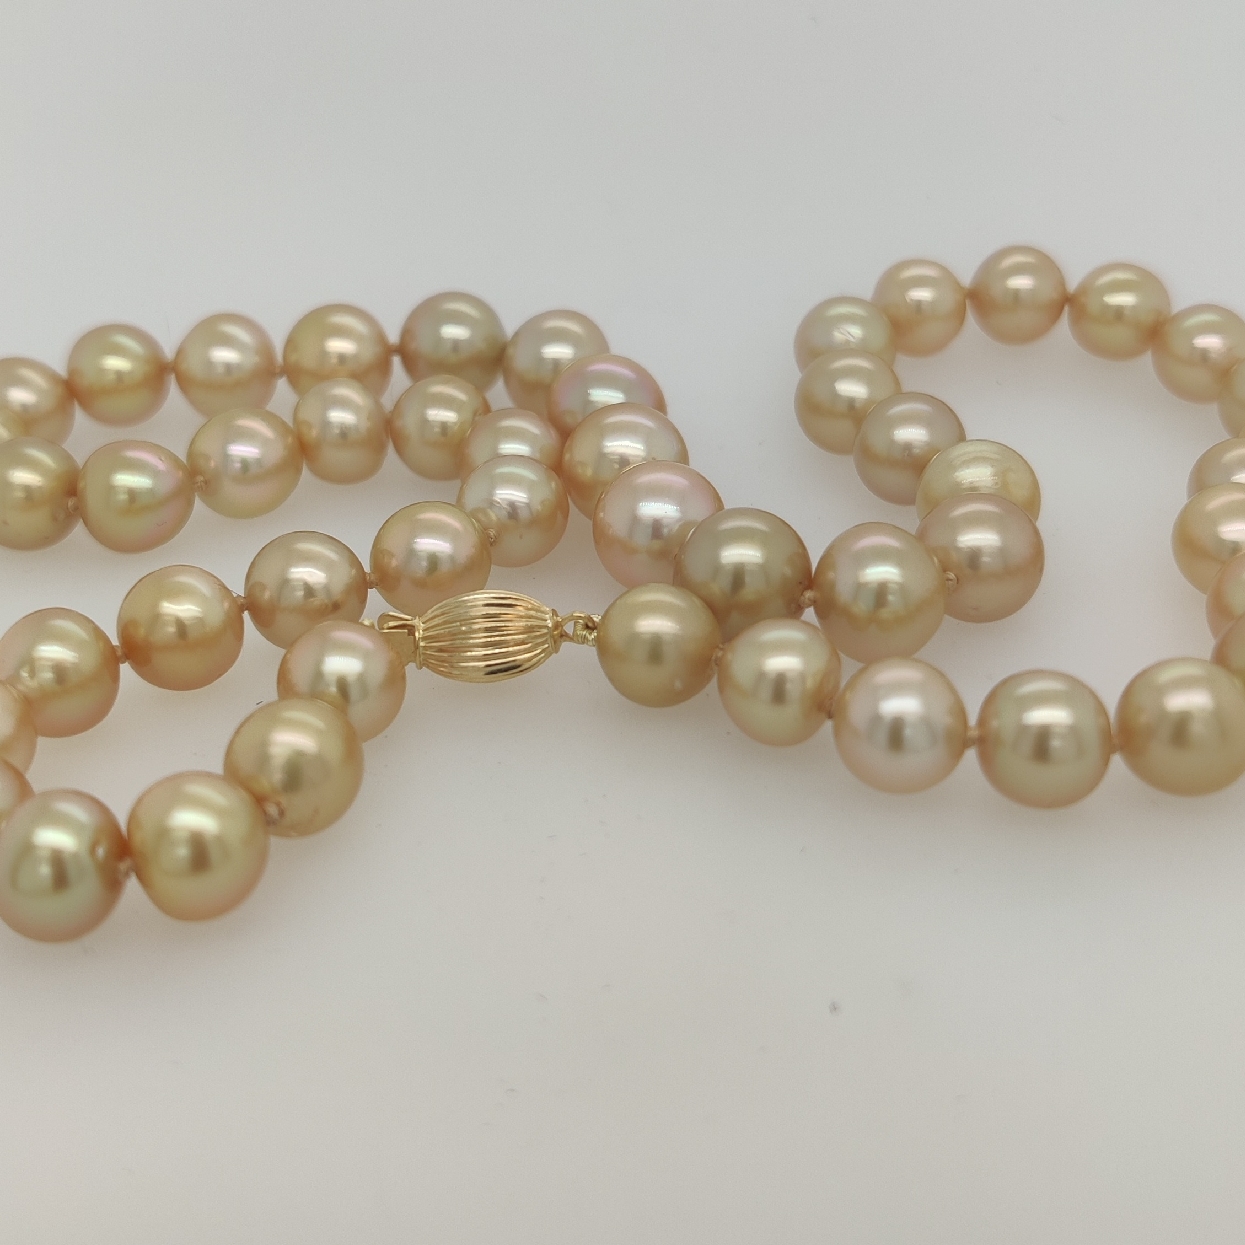 8mm - 10mm Graduated South Sea Golden Pearl Strand on 14k Yellow Gold Clasp; 17.5 Inches